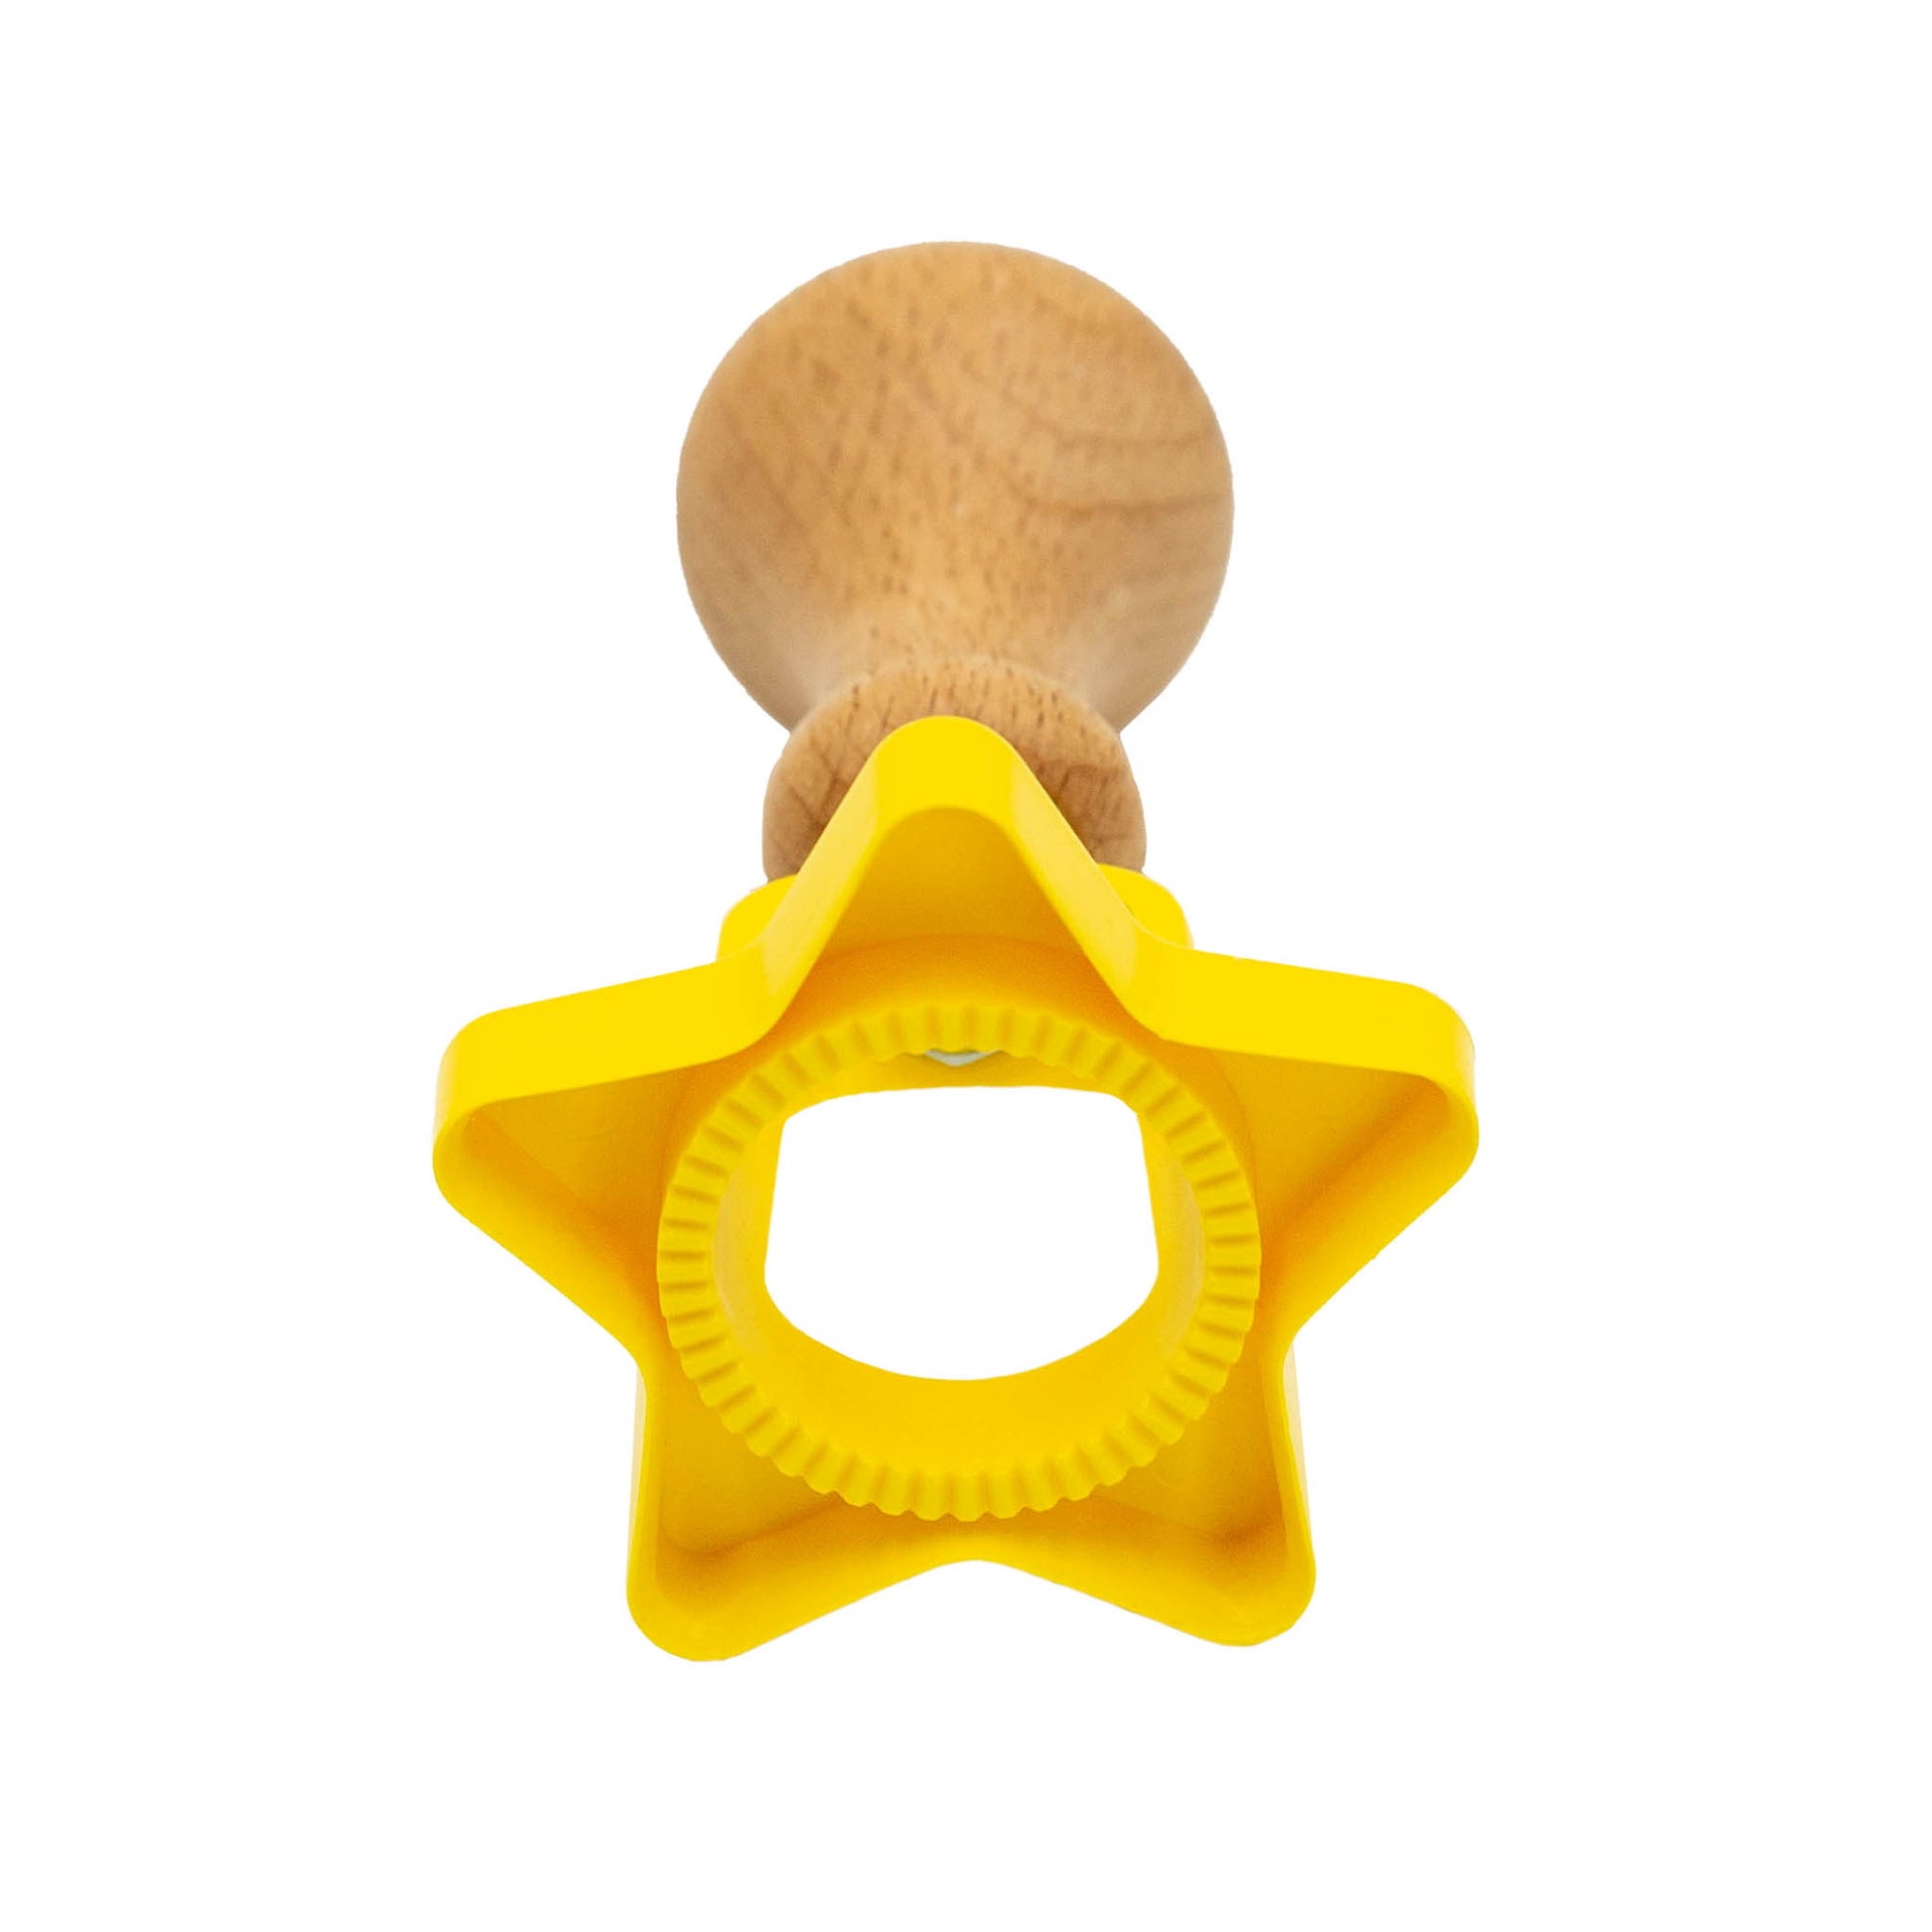 Yellow plastic star shape biscuit and pastry cutter with wooden handle. 